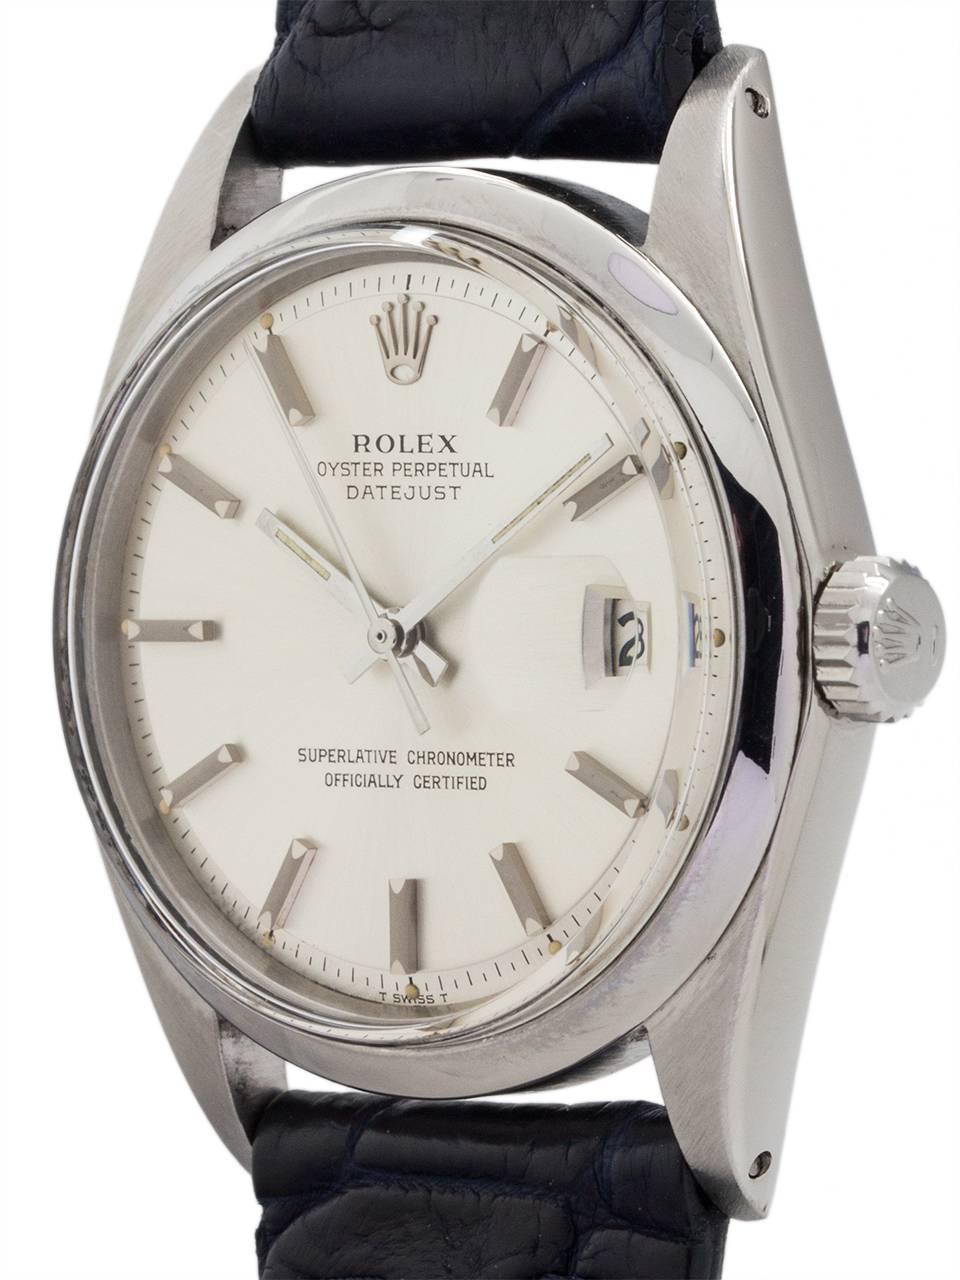 Rolex Man’s Stainless Steel Datejust ref 1603 serial # 2.4 million circa 1970. Featuring 36mm diameter case with smooth bezel, acrylic crystal, and original silver satin pie pan dial with applied silver indexes and silver baton hands. Powered by